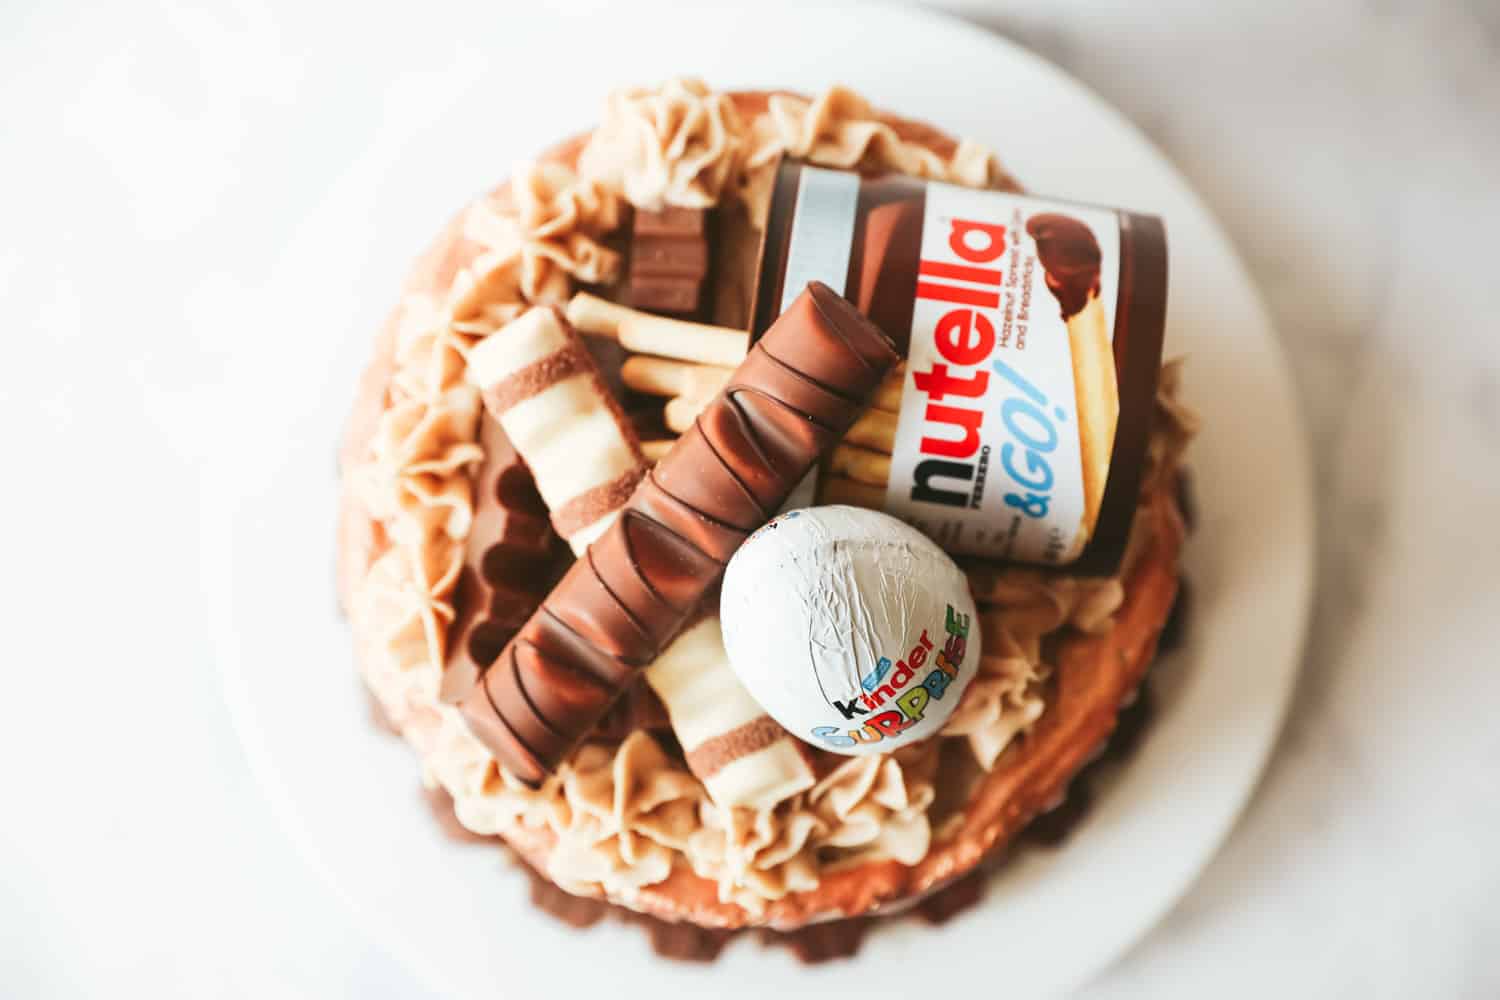 Overhead view of a Kinder cake decorated with a Nutella and Go, a Kinder Egg, Kinder chocolate and Kinder Bueno